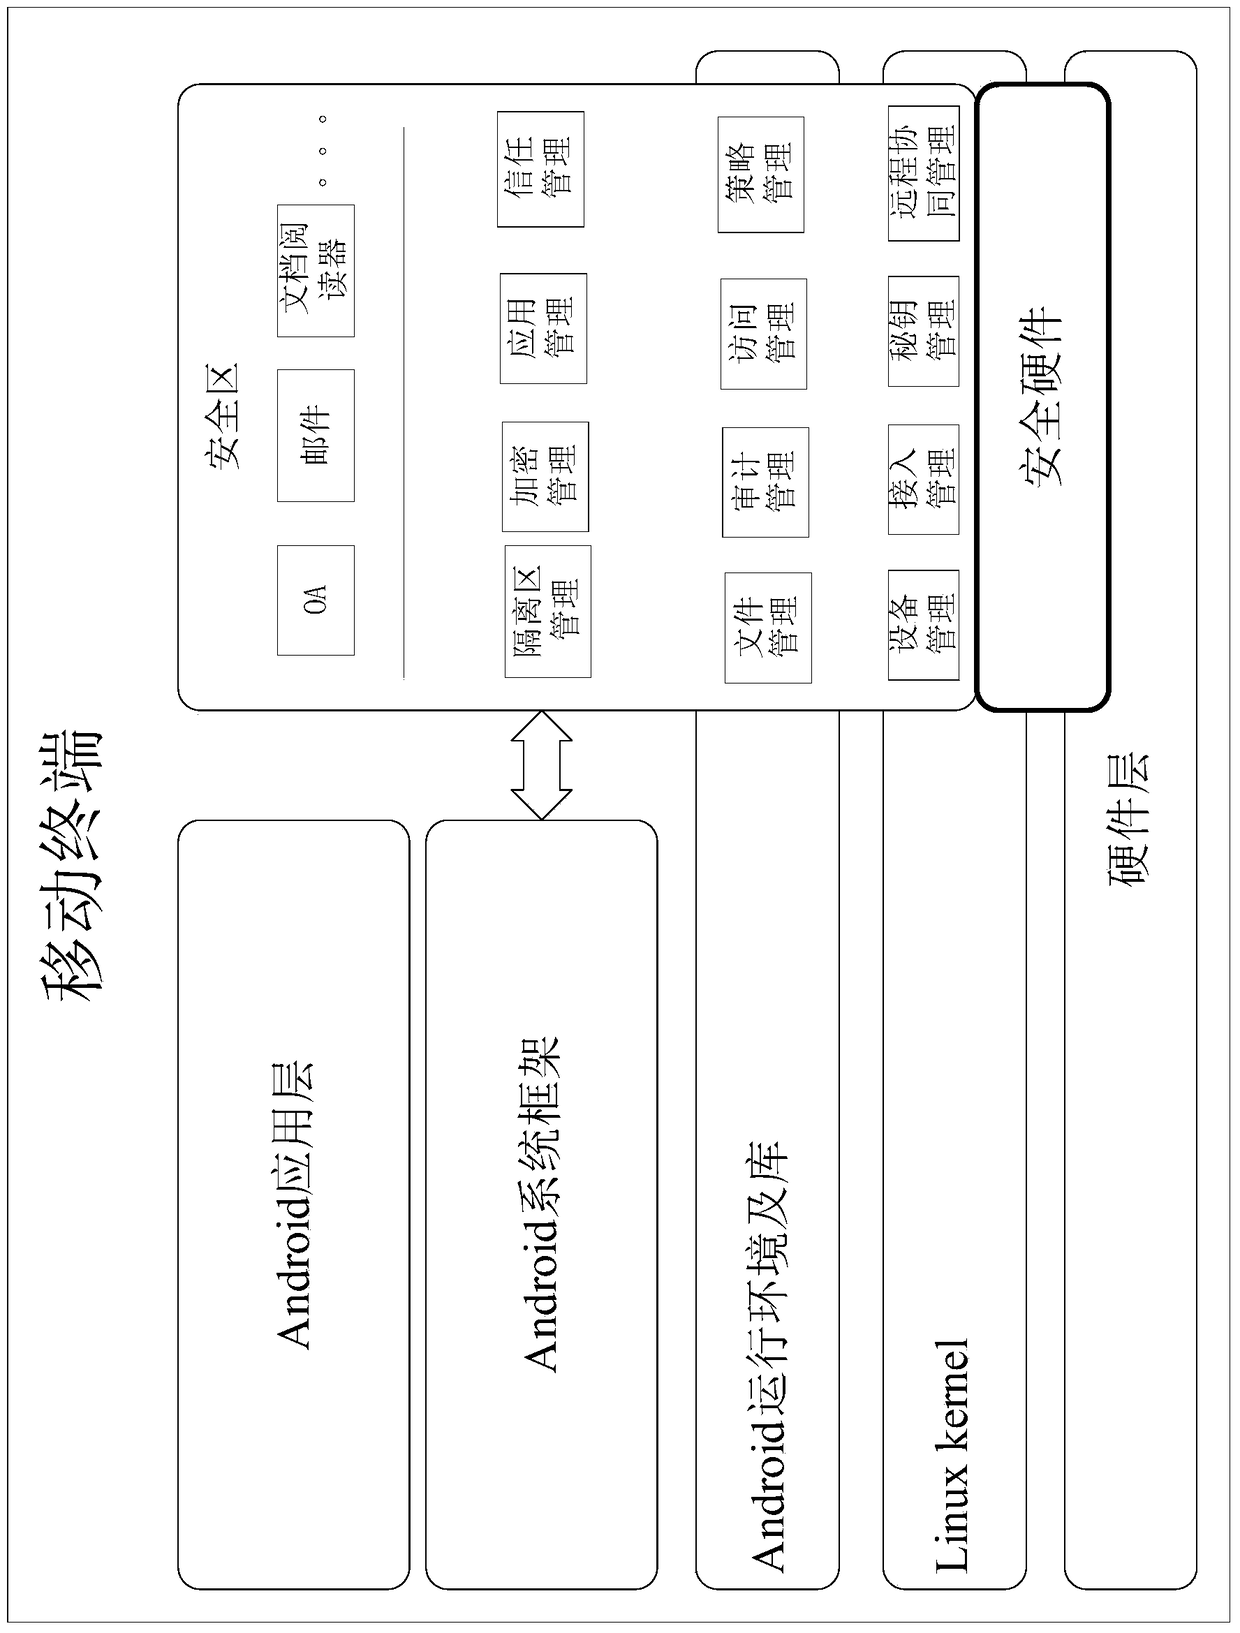 Mobile terminal security protection method, mobile terminal, security system and application method